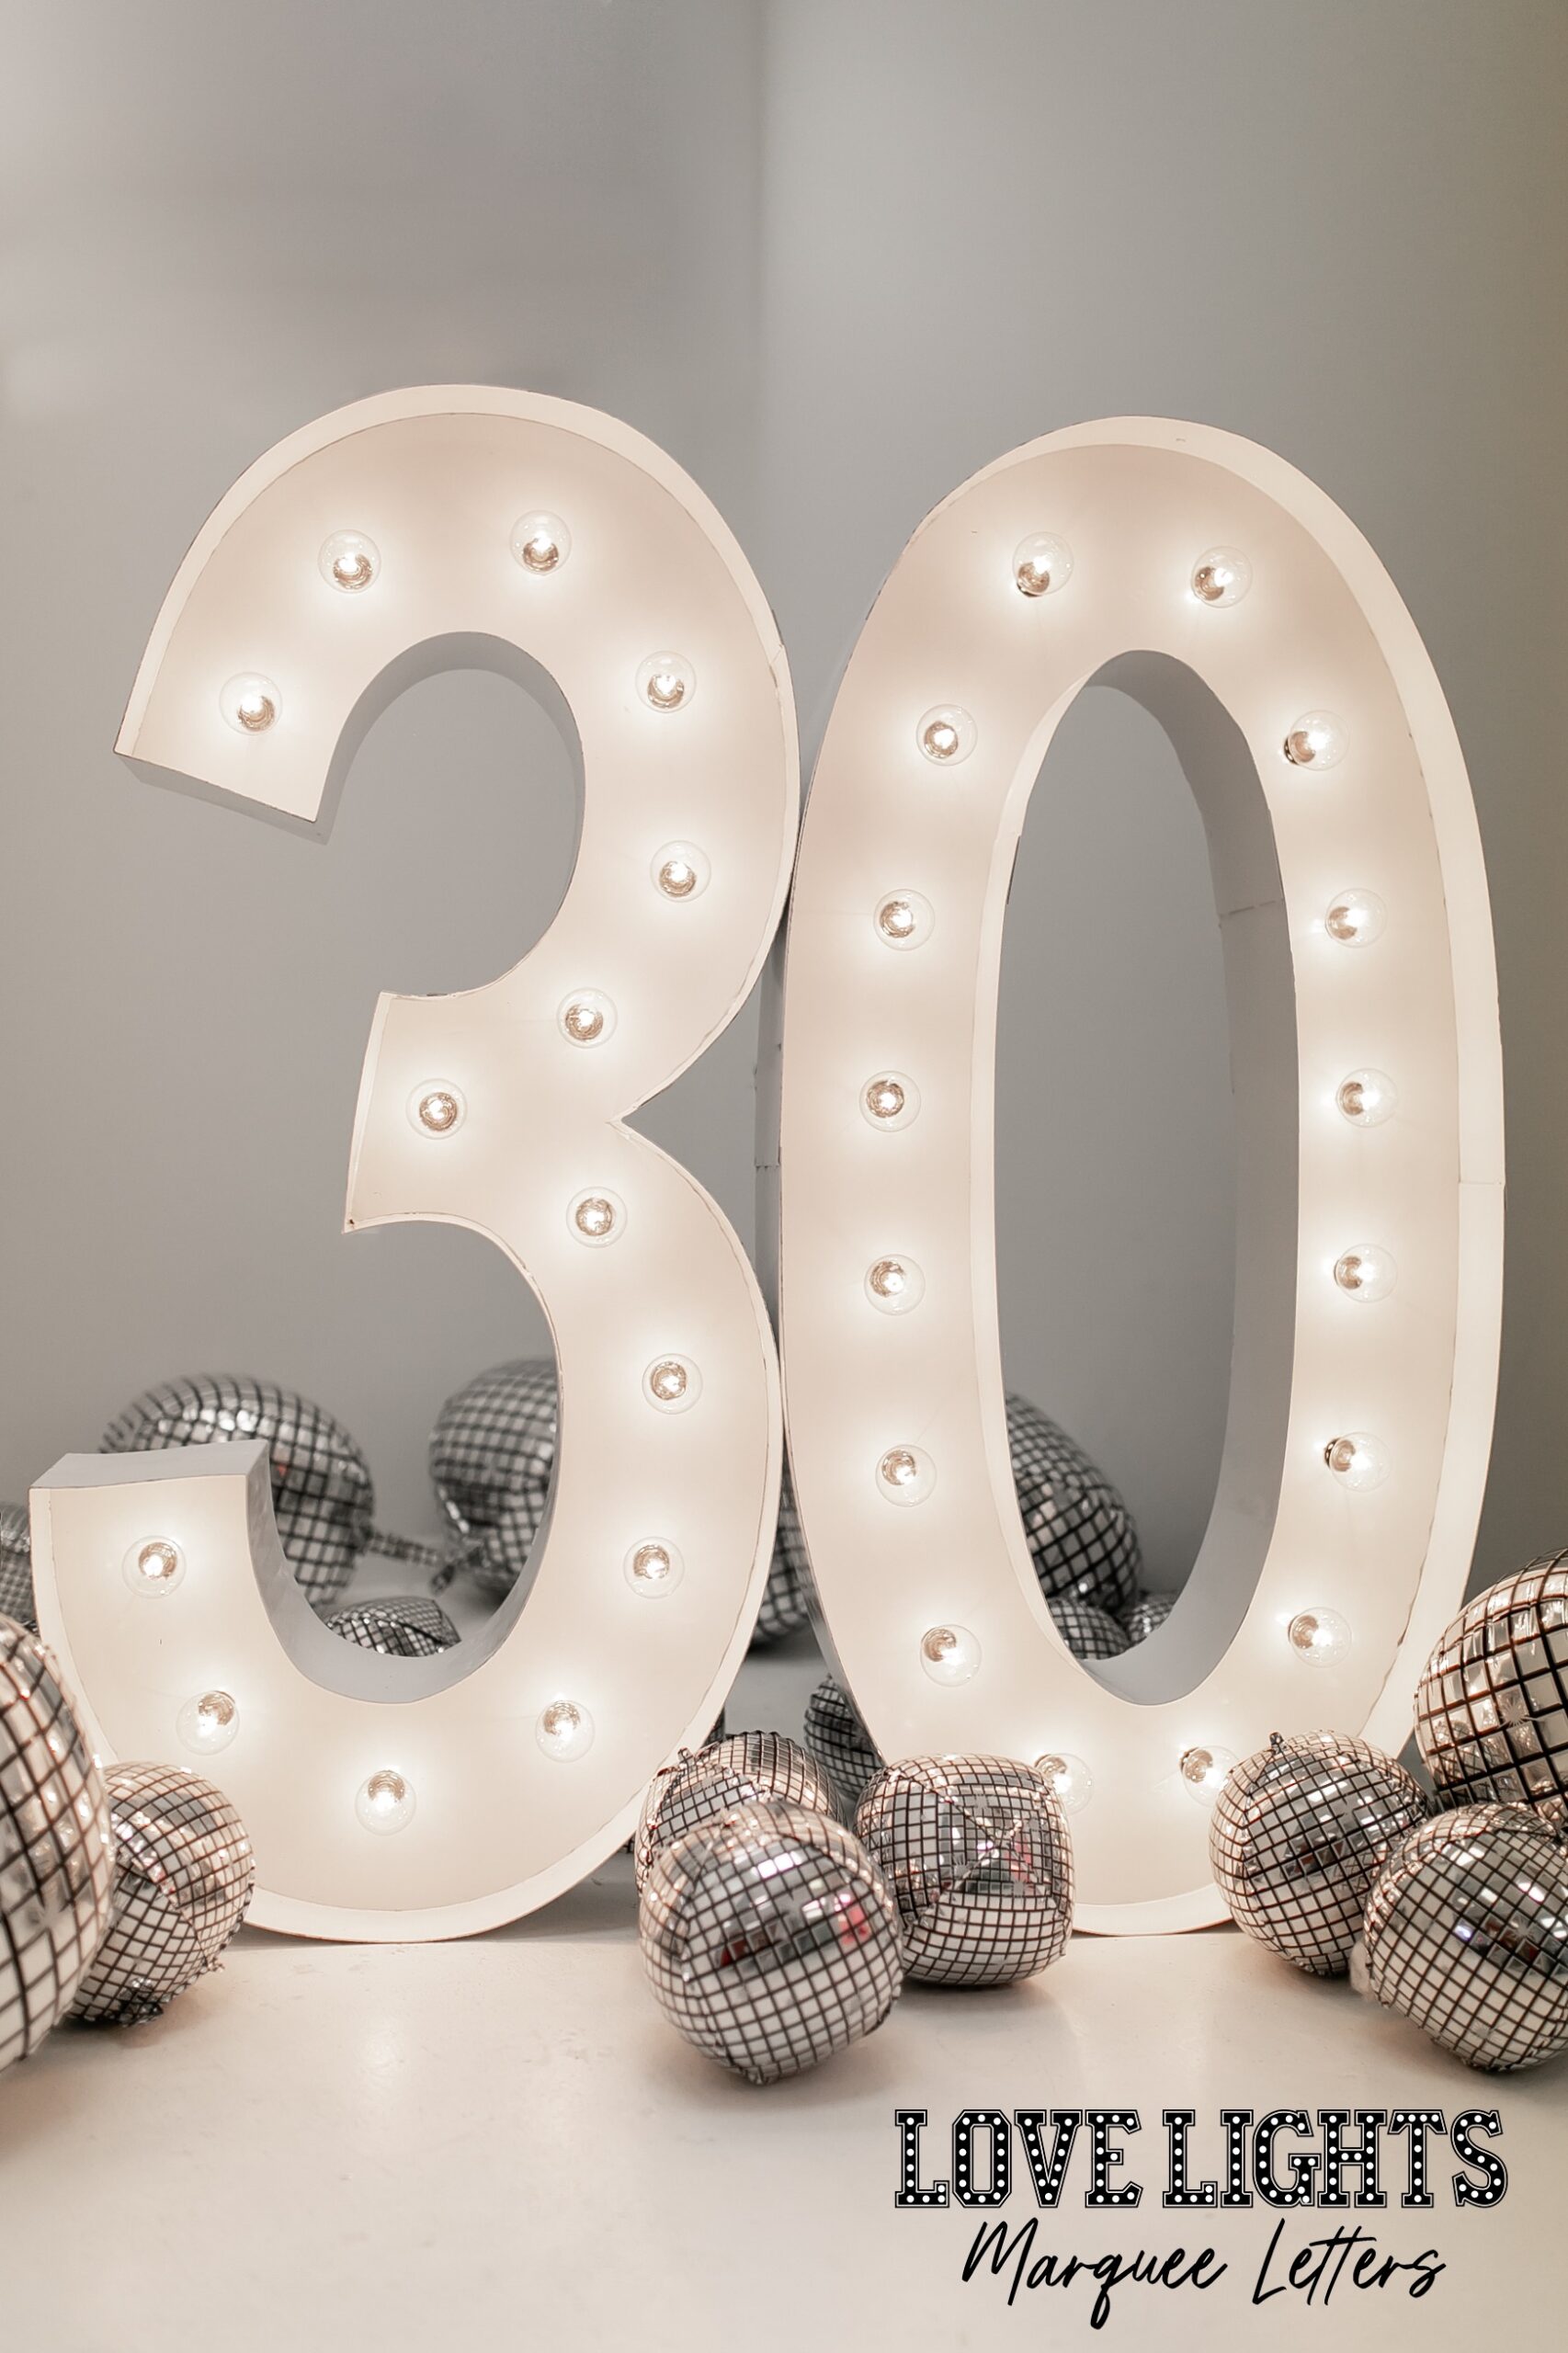 30 in lit marquee letters in a room with balloons